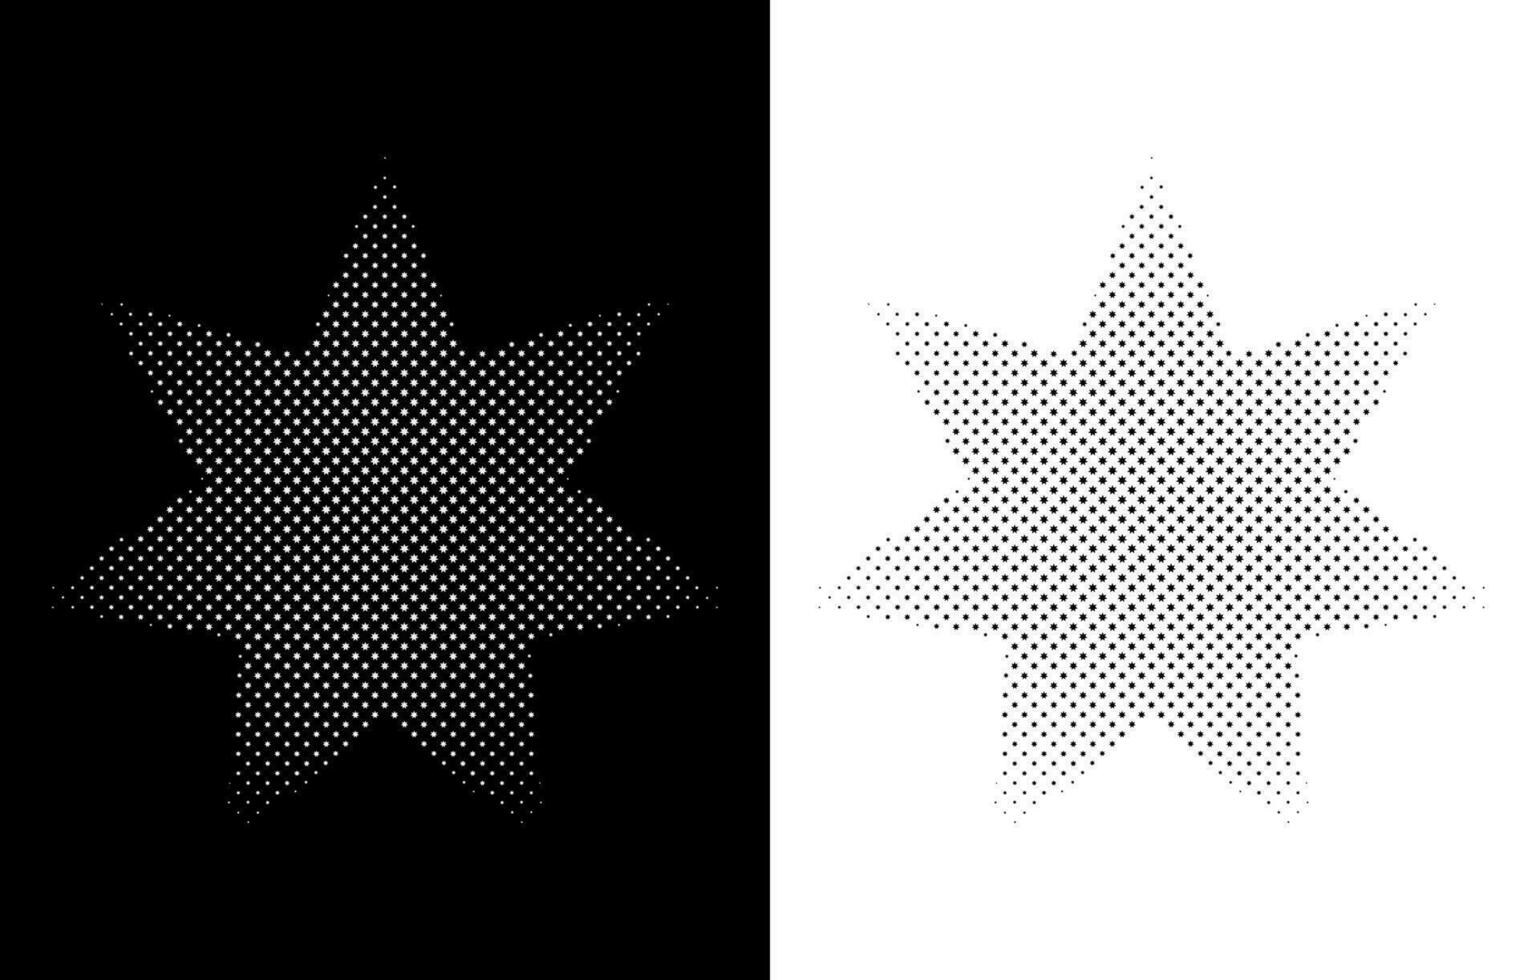 Circle halftone free, Monocromy Star halftone effect vector free, Abstract dotted circles